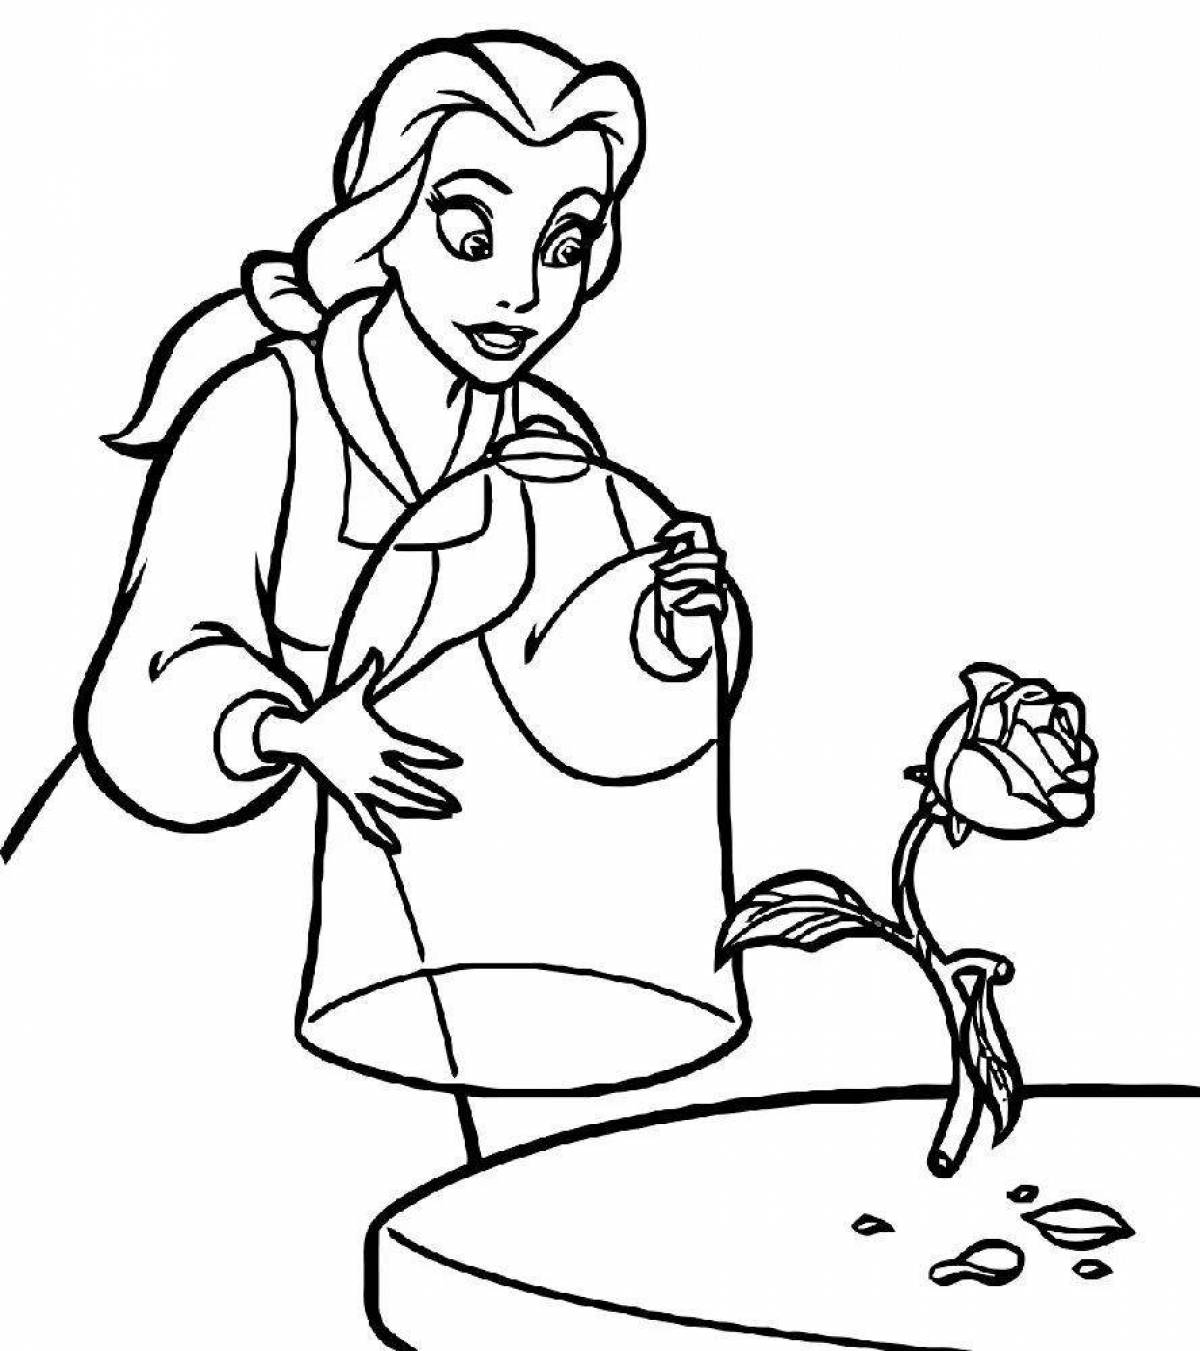 Hypnotic beauty and the beast coloring pages for kids